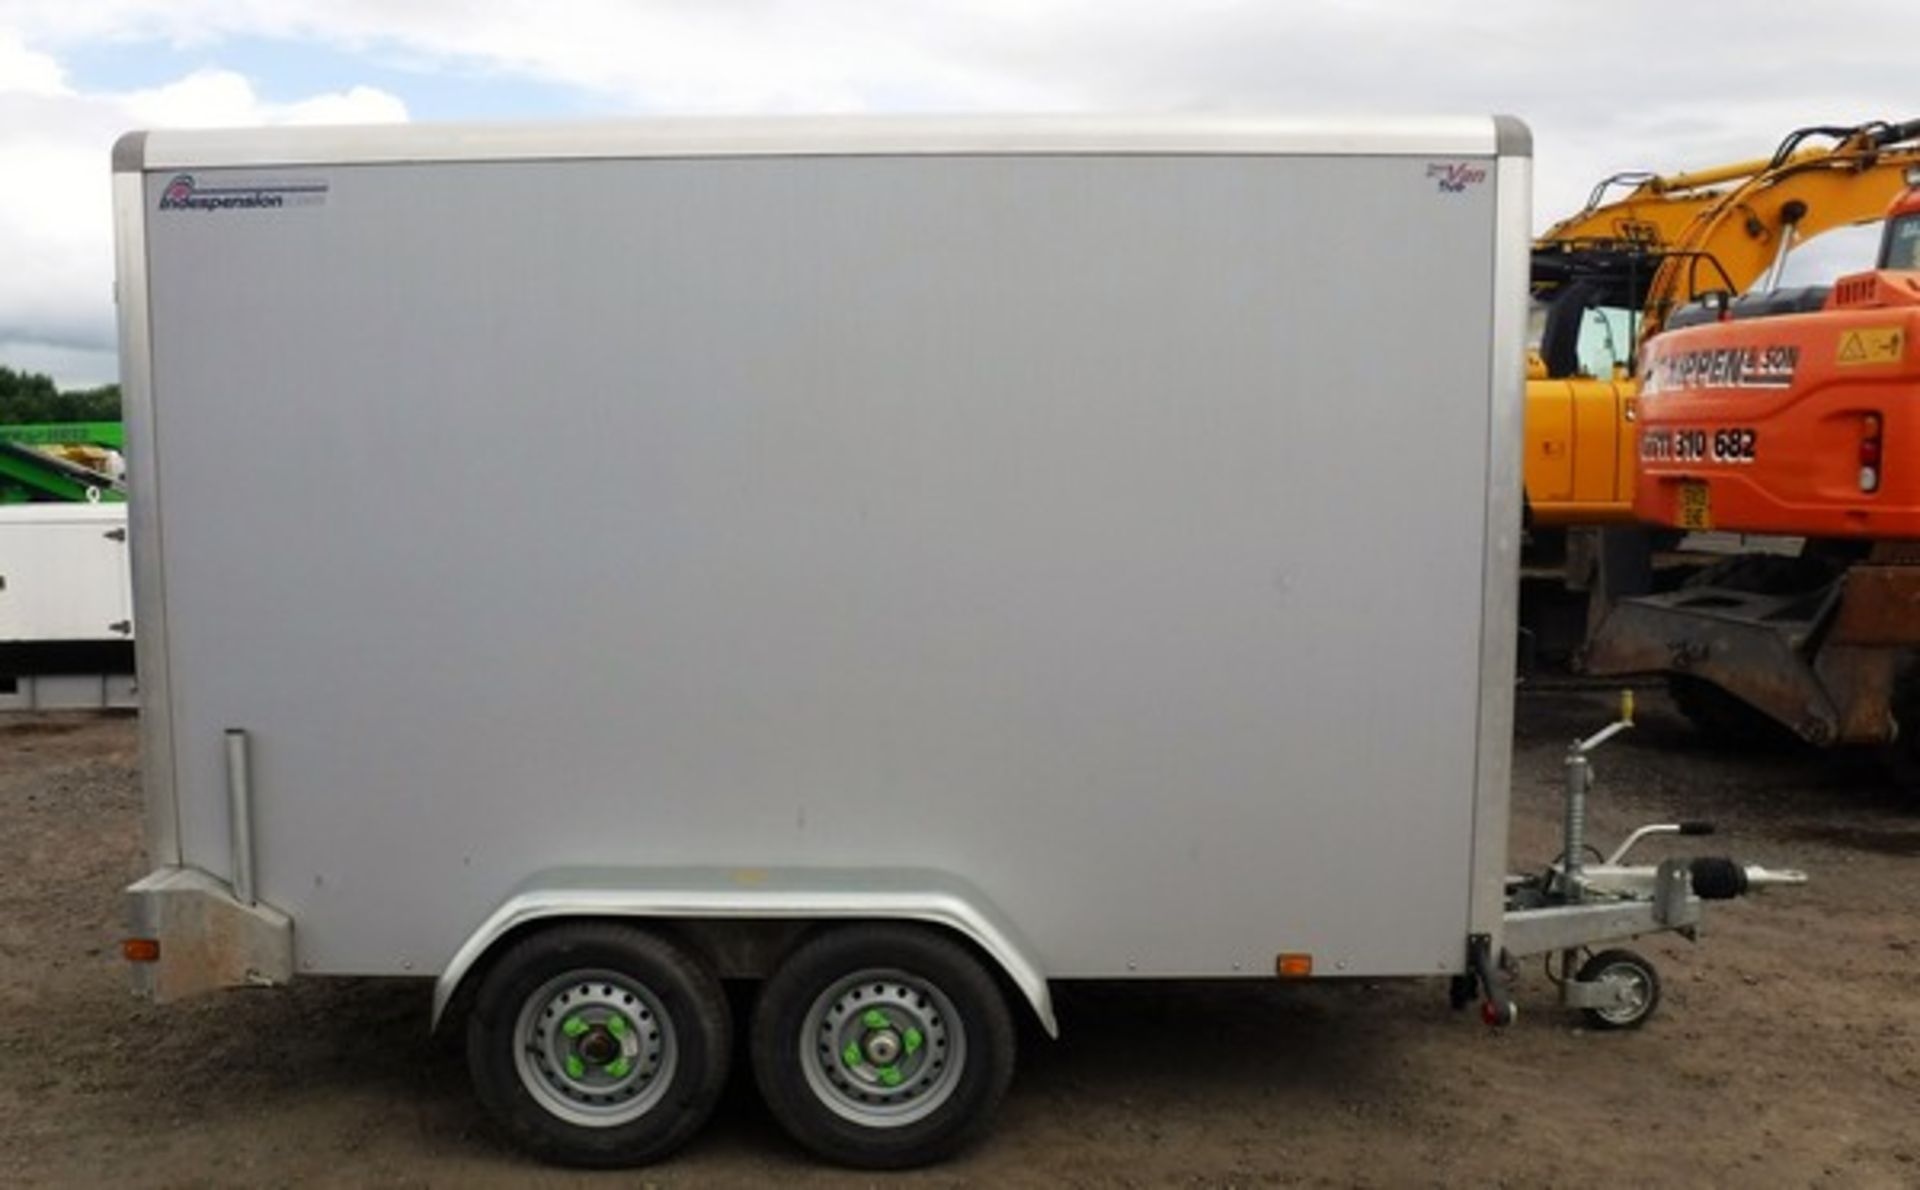 INDESPENSION BOX TRAILER WITH 2 OPENING BACK DOORS & 1 SIDE DOOR, 10FT X 5FT (APPROX) S/N213526 ASSE - Image 7 of 12